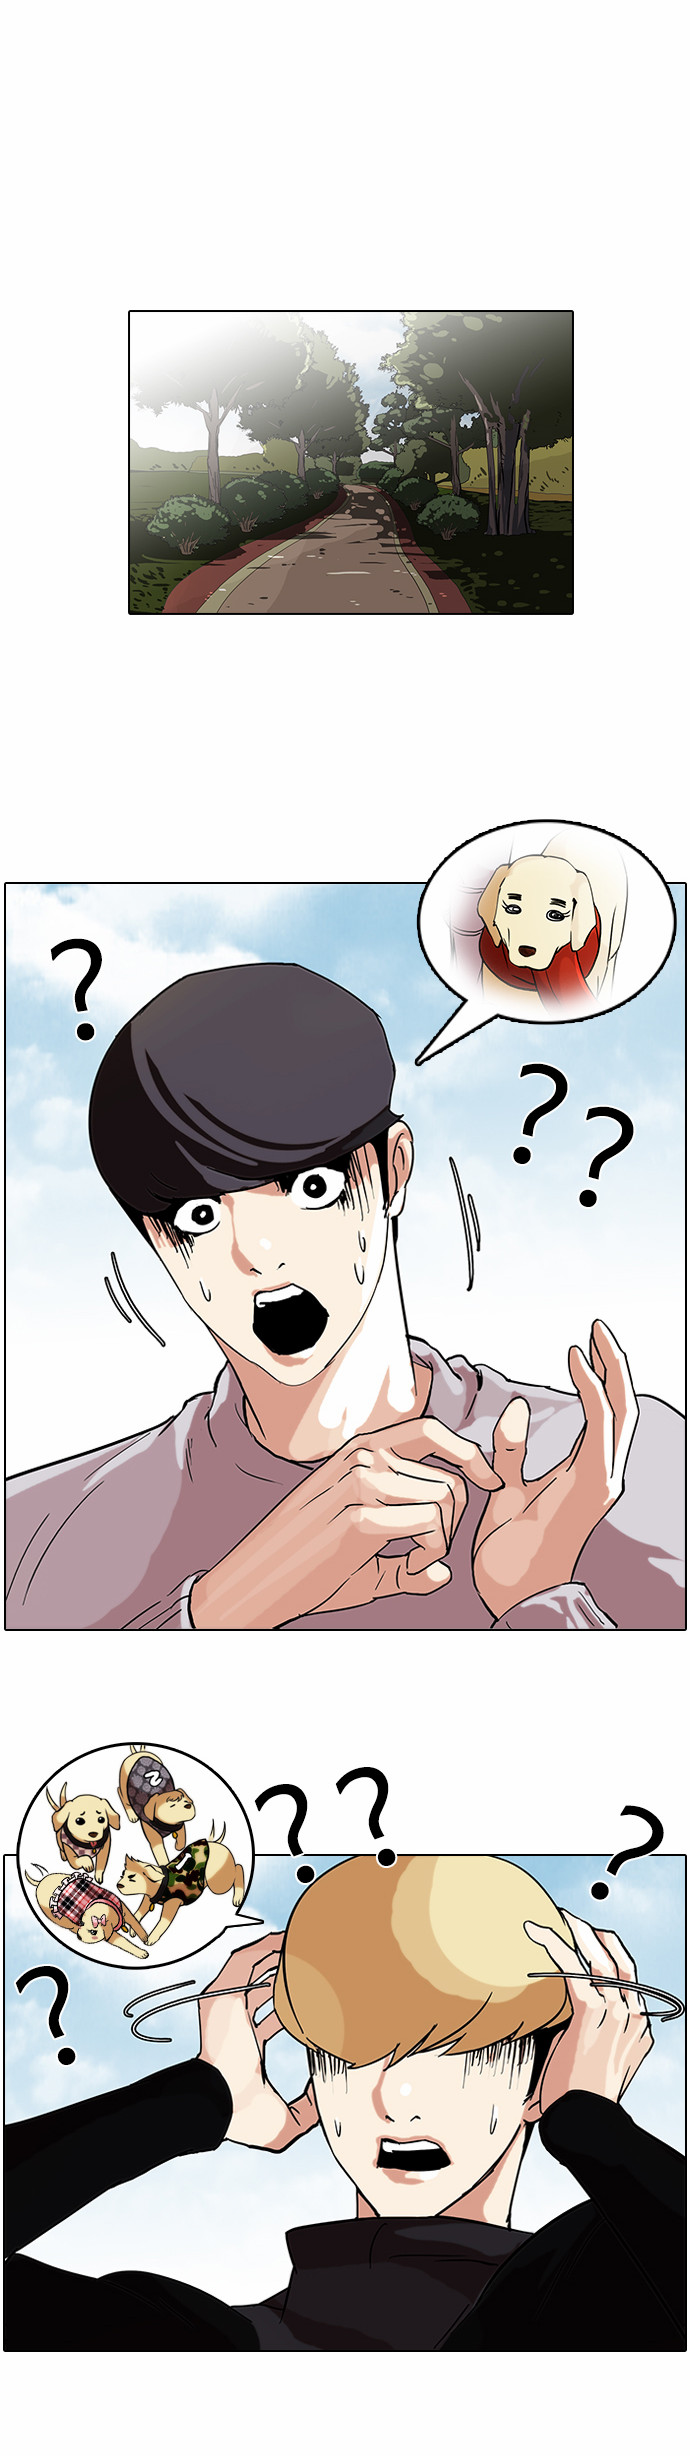 Lookism - Chapter 70 - Page 3